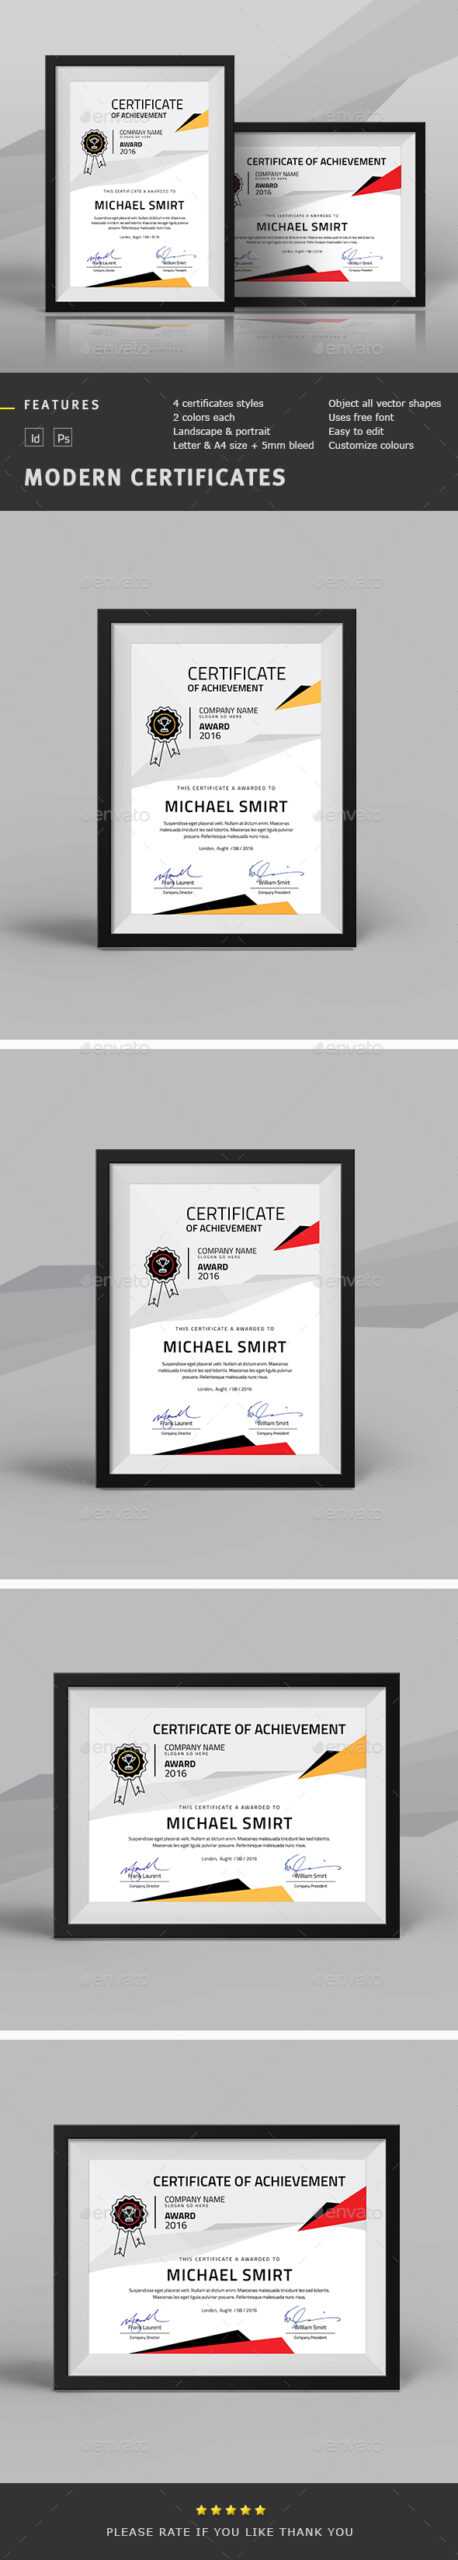 Indesign Achievement And Corporate Certificate Templates Inside Indesign Certificate Template